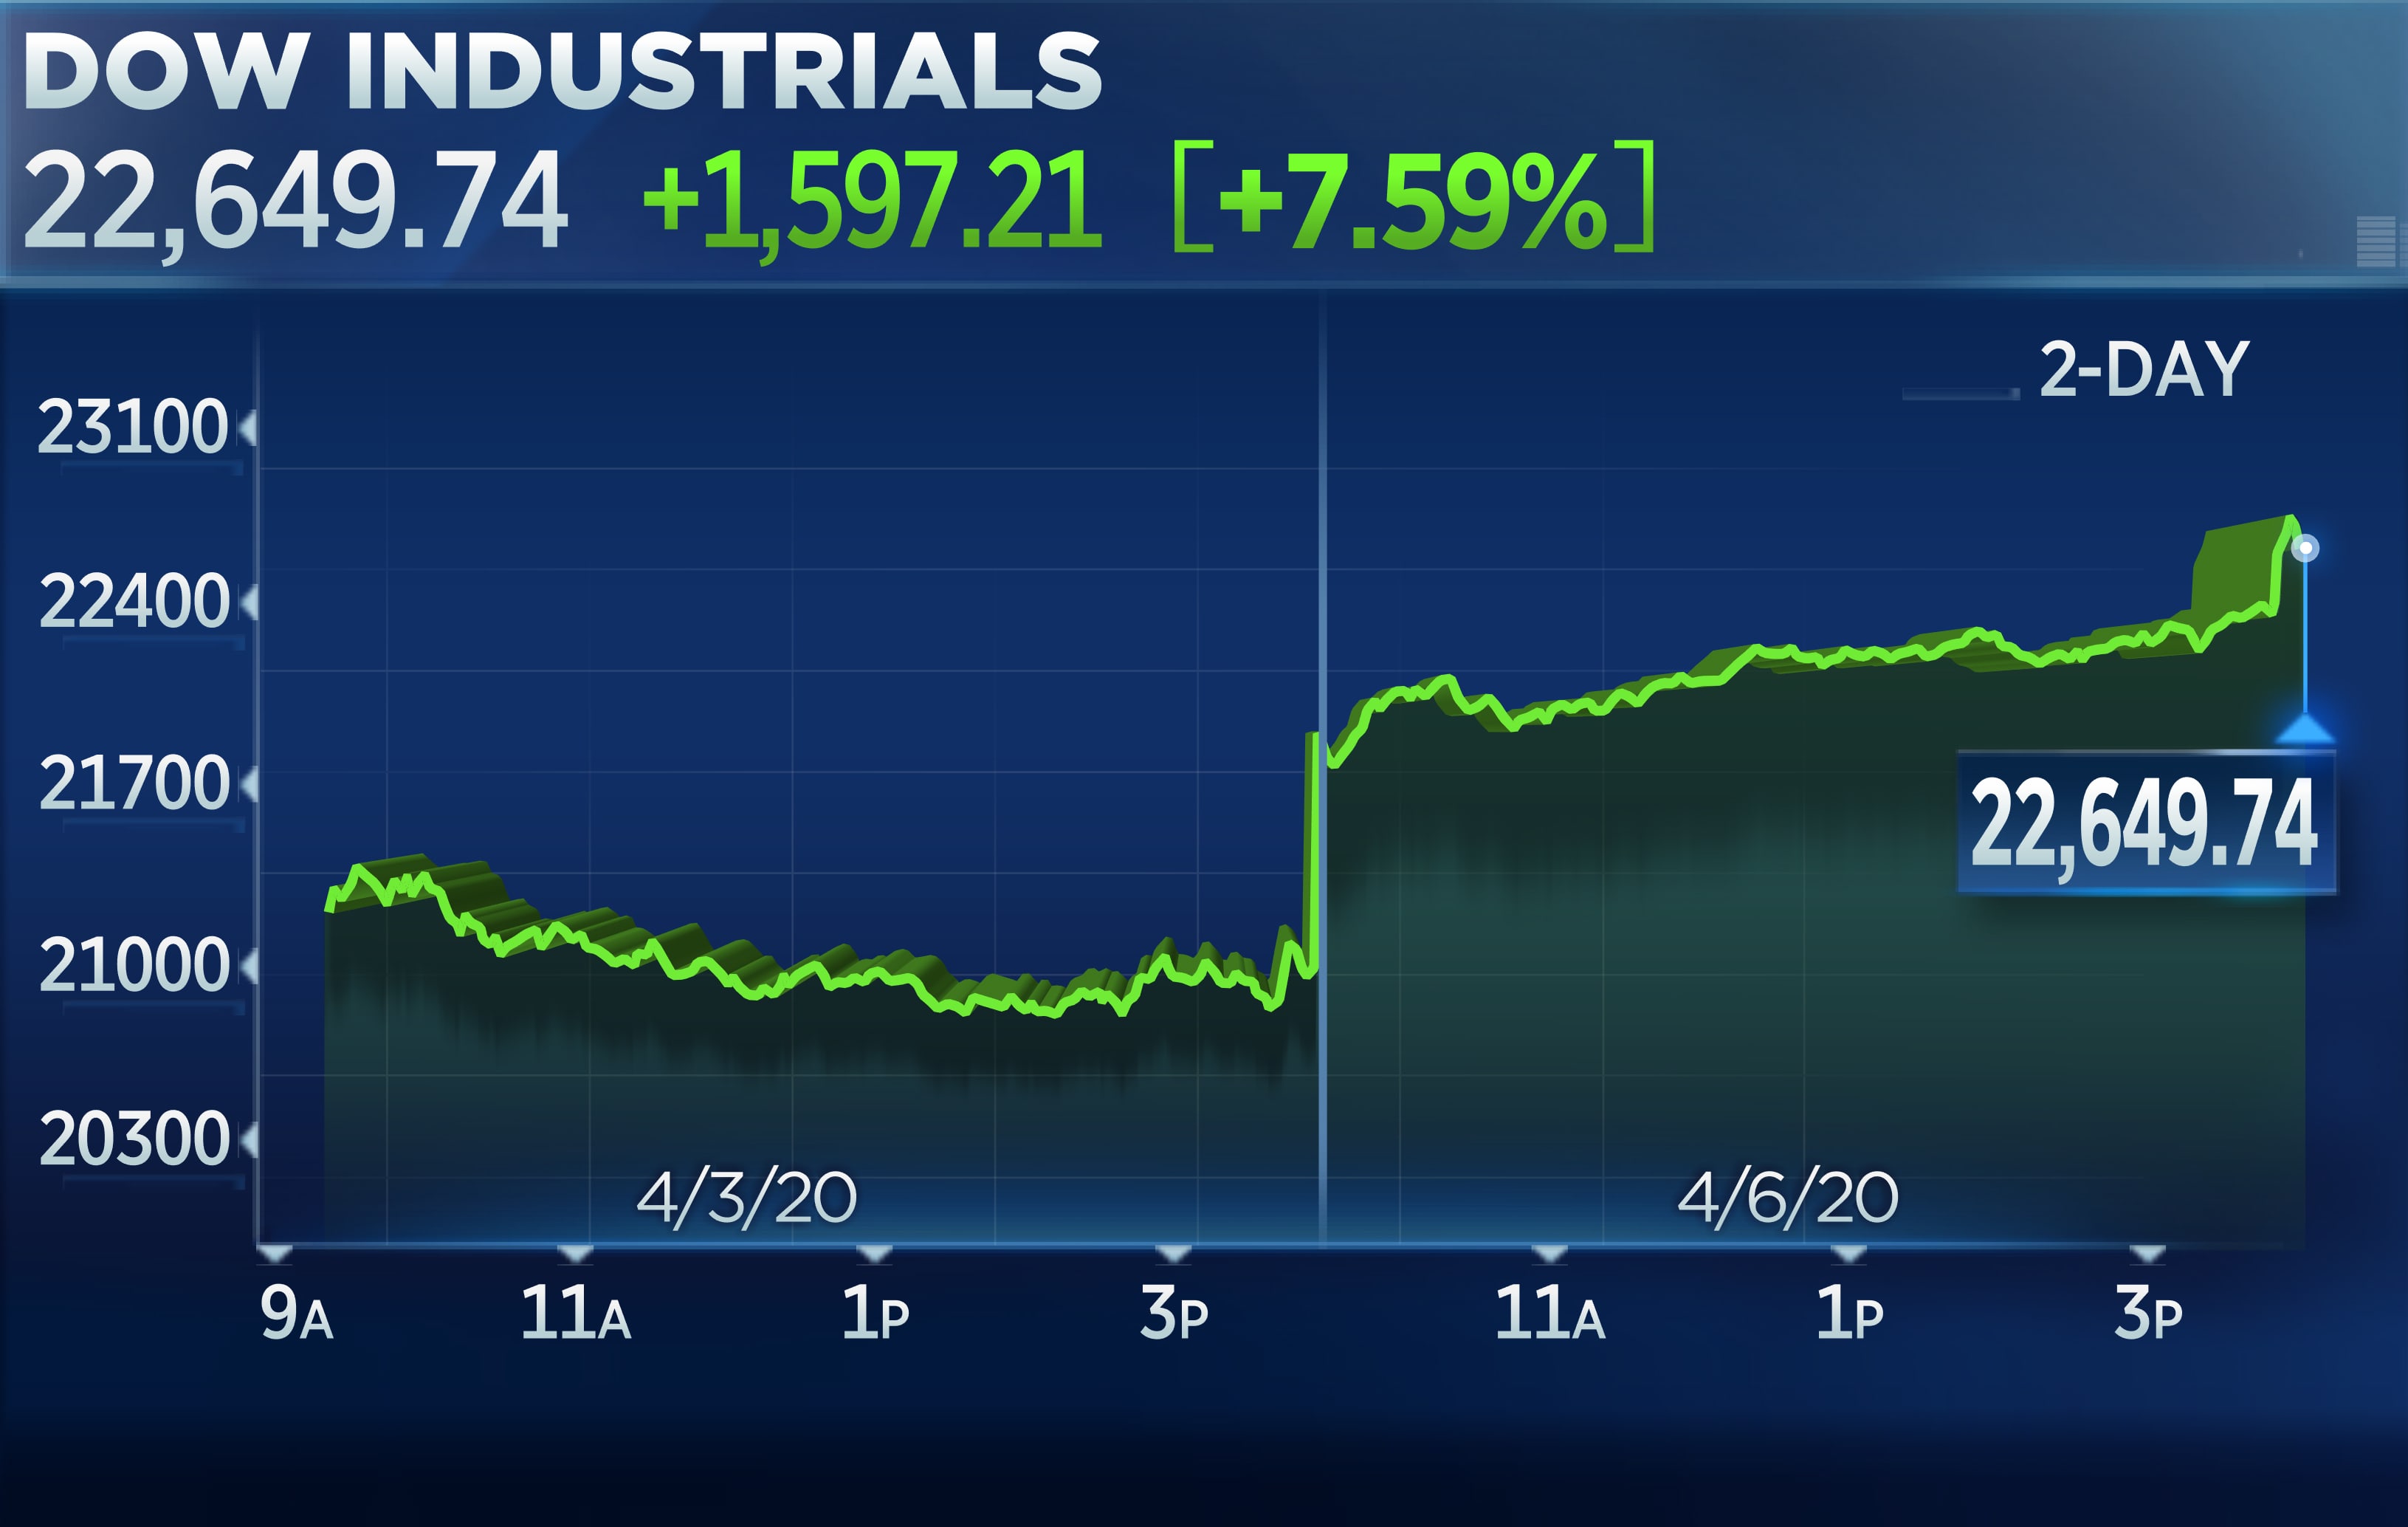 Stocks are set to rally on hope for an effective coronavirus treatment, Dow futures rise 700 points